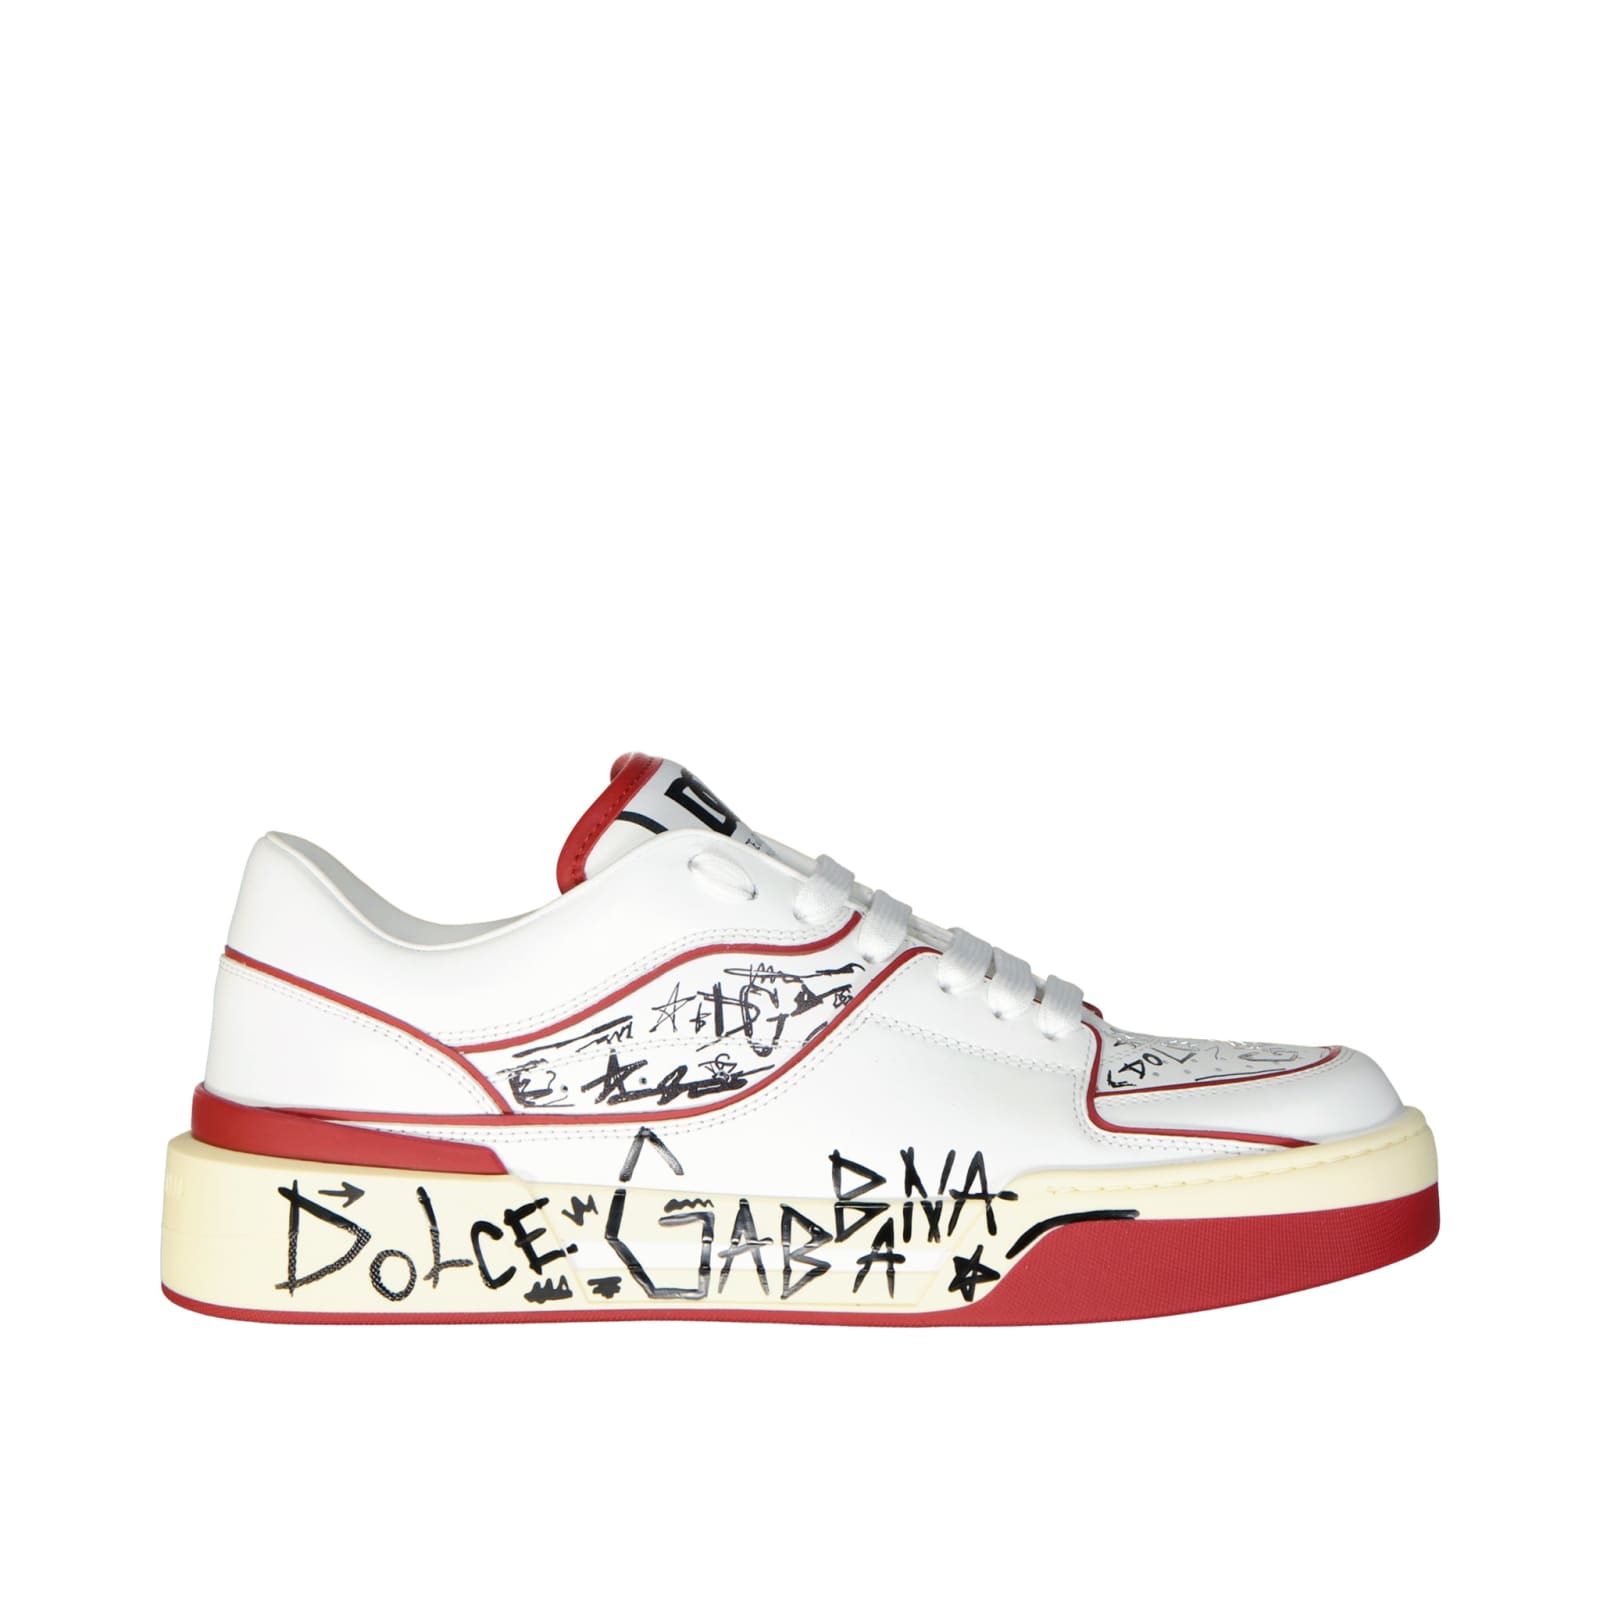 DOLCE & GABBANA PRINTED LEATHER SNEAKERS